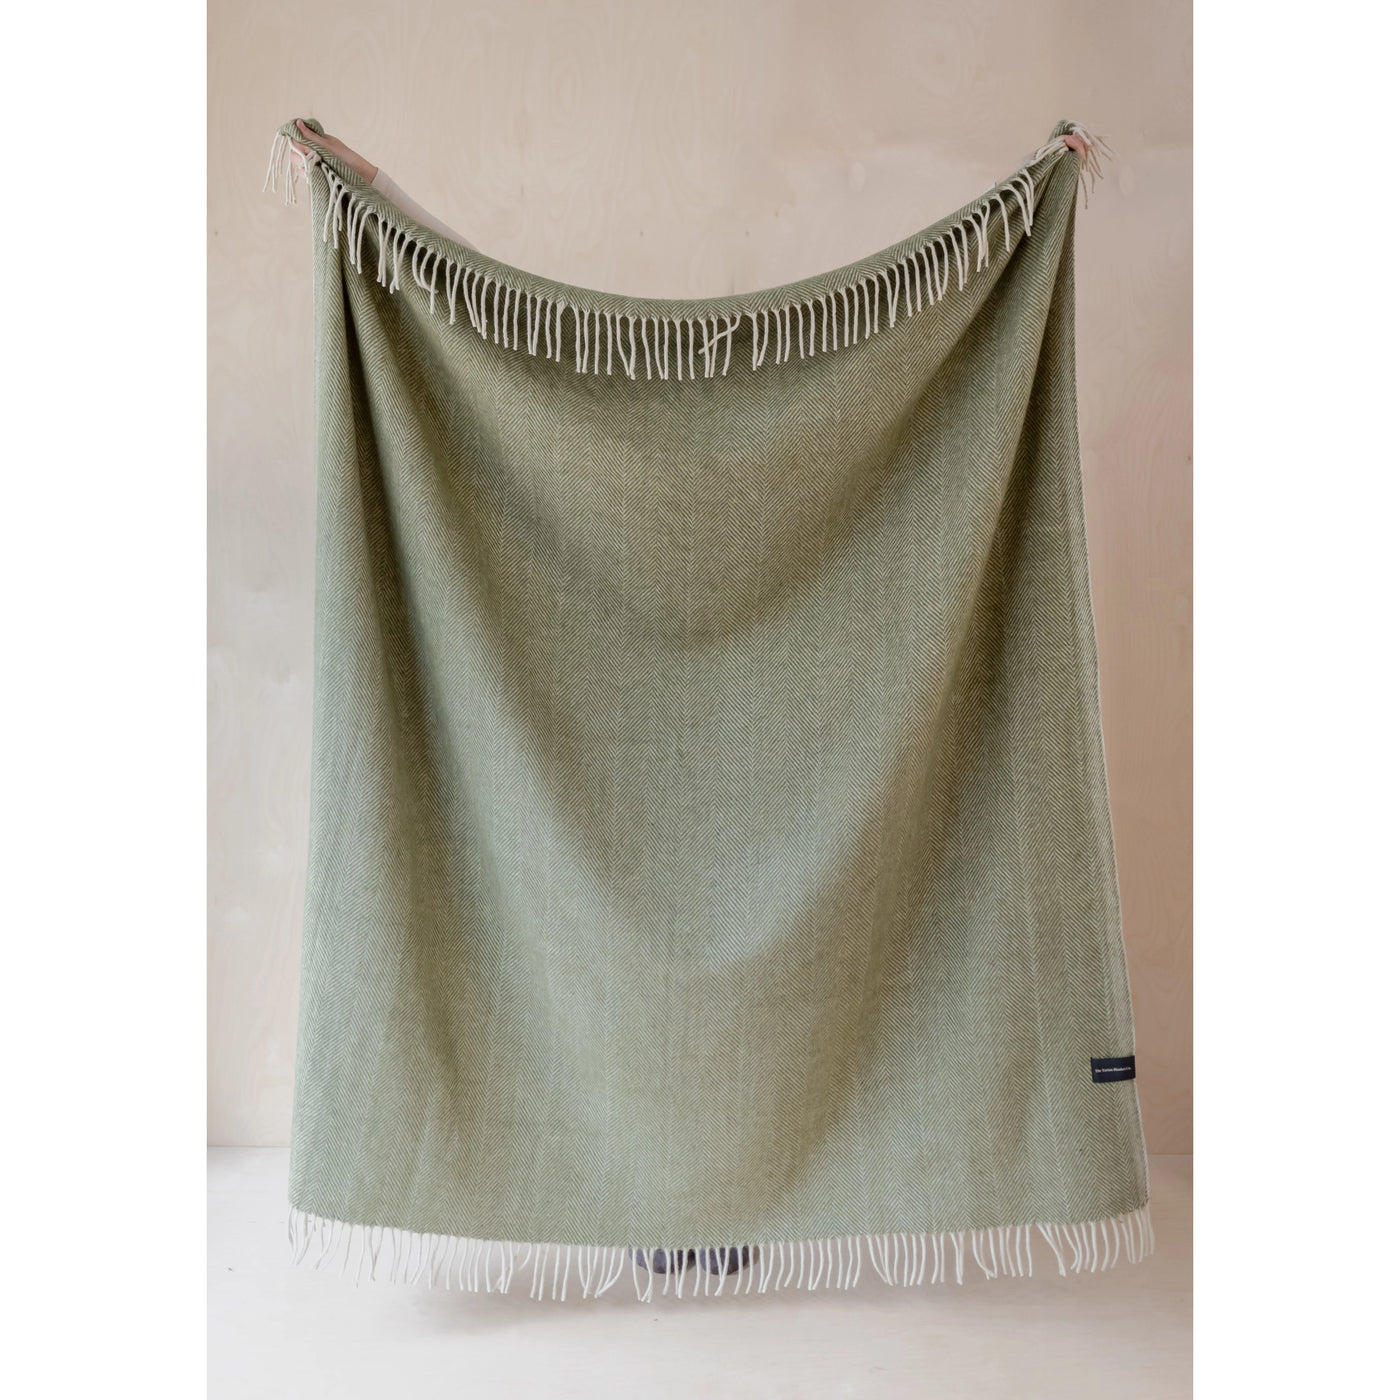 Recycled Wool Blanket in Olive